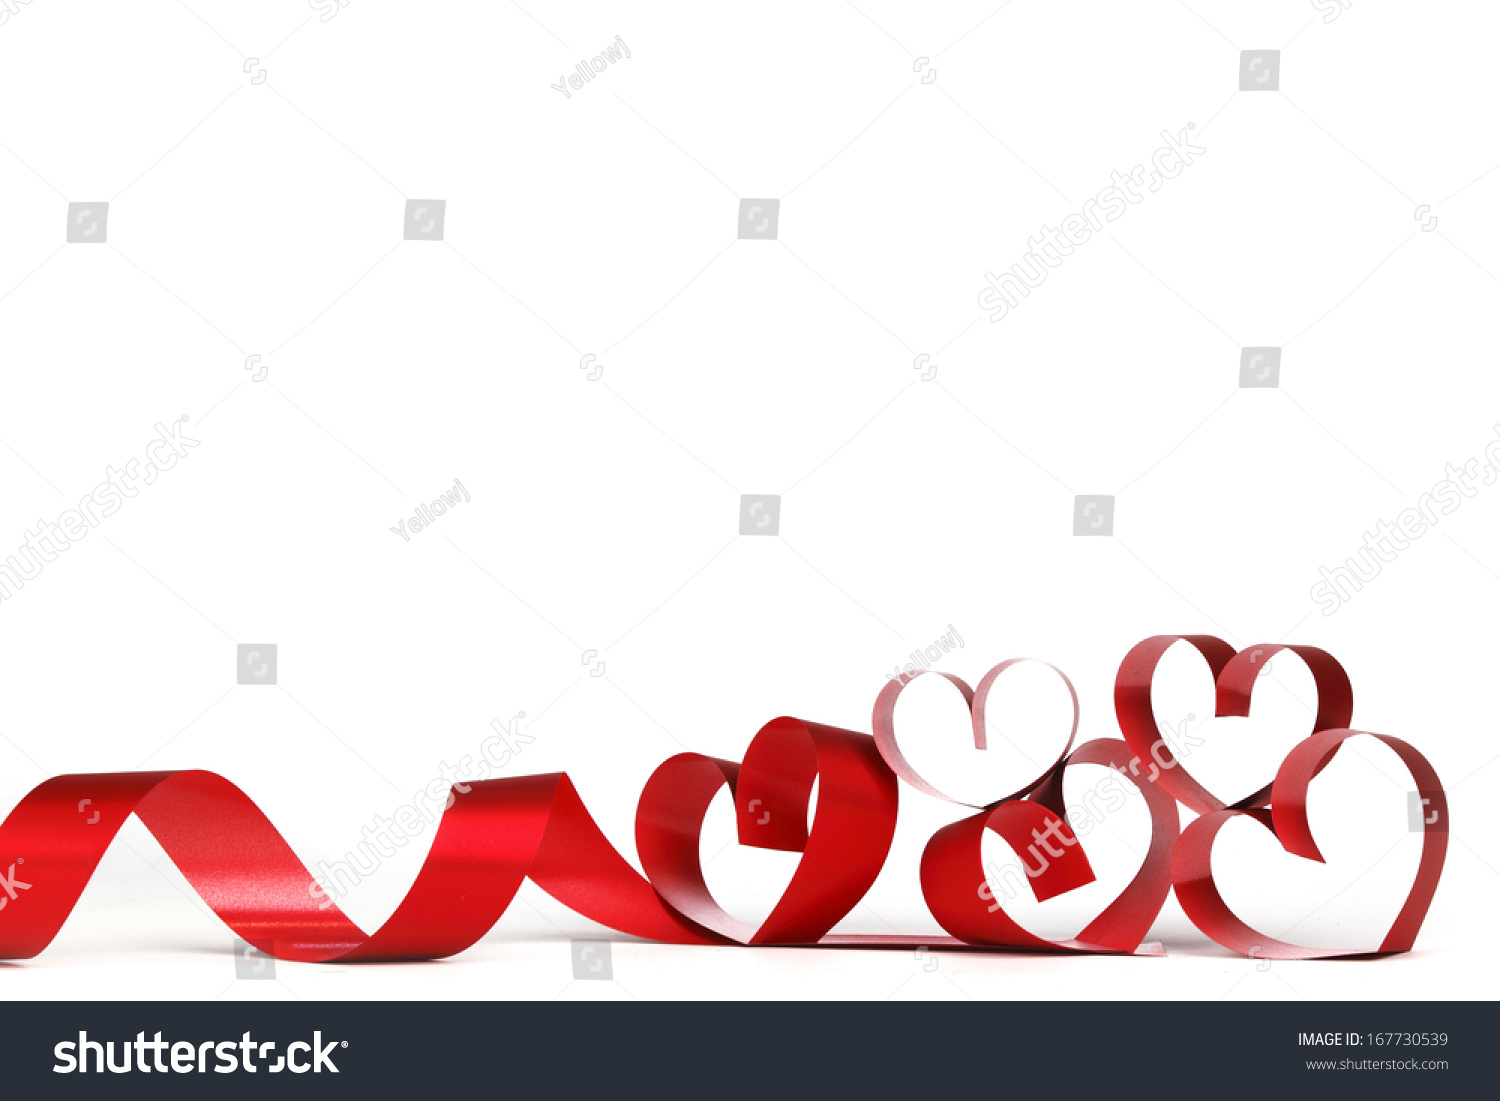 Ribbons shaped as hearts on white, valentines day concept #167730539